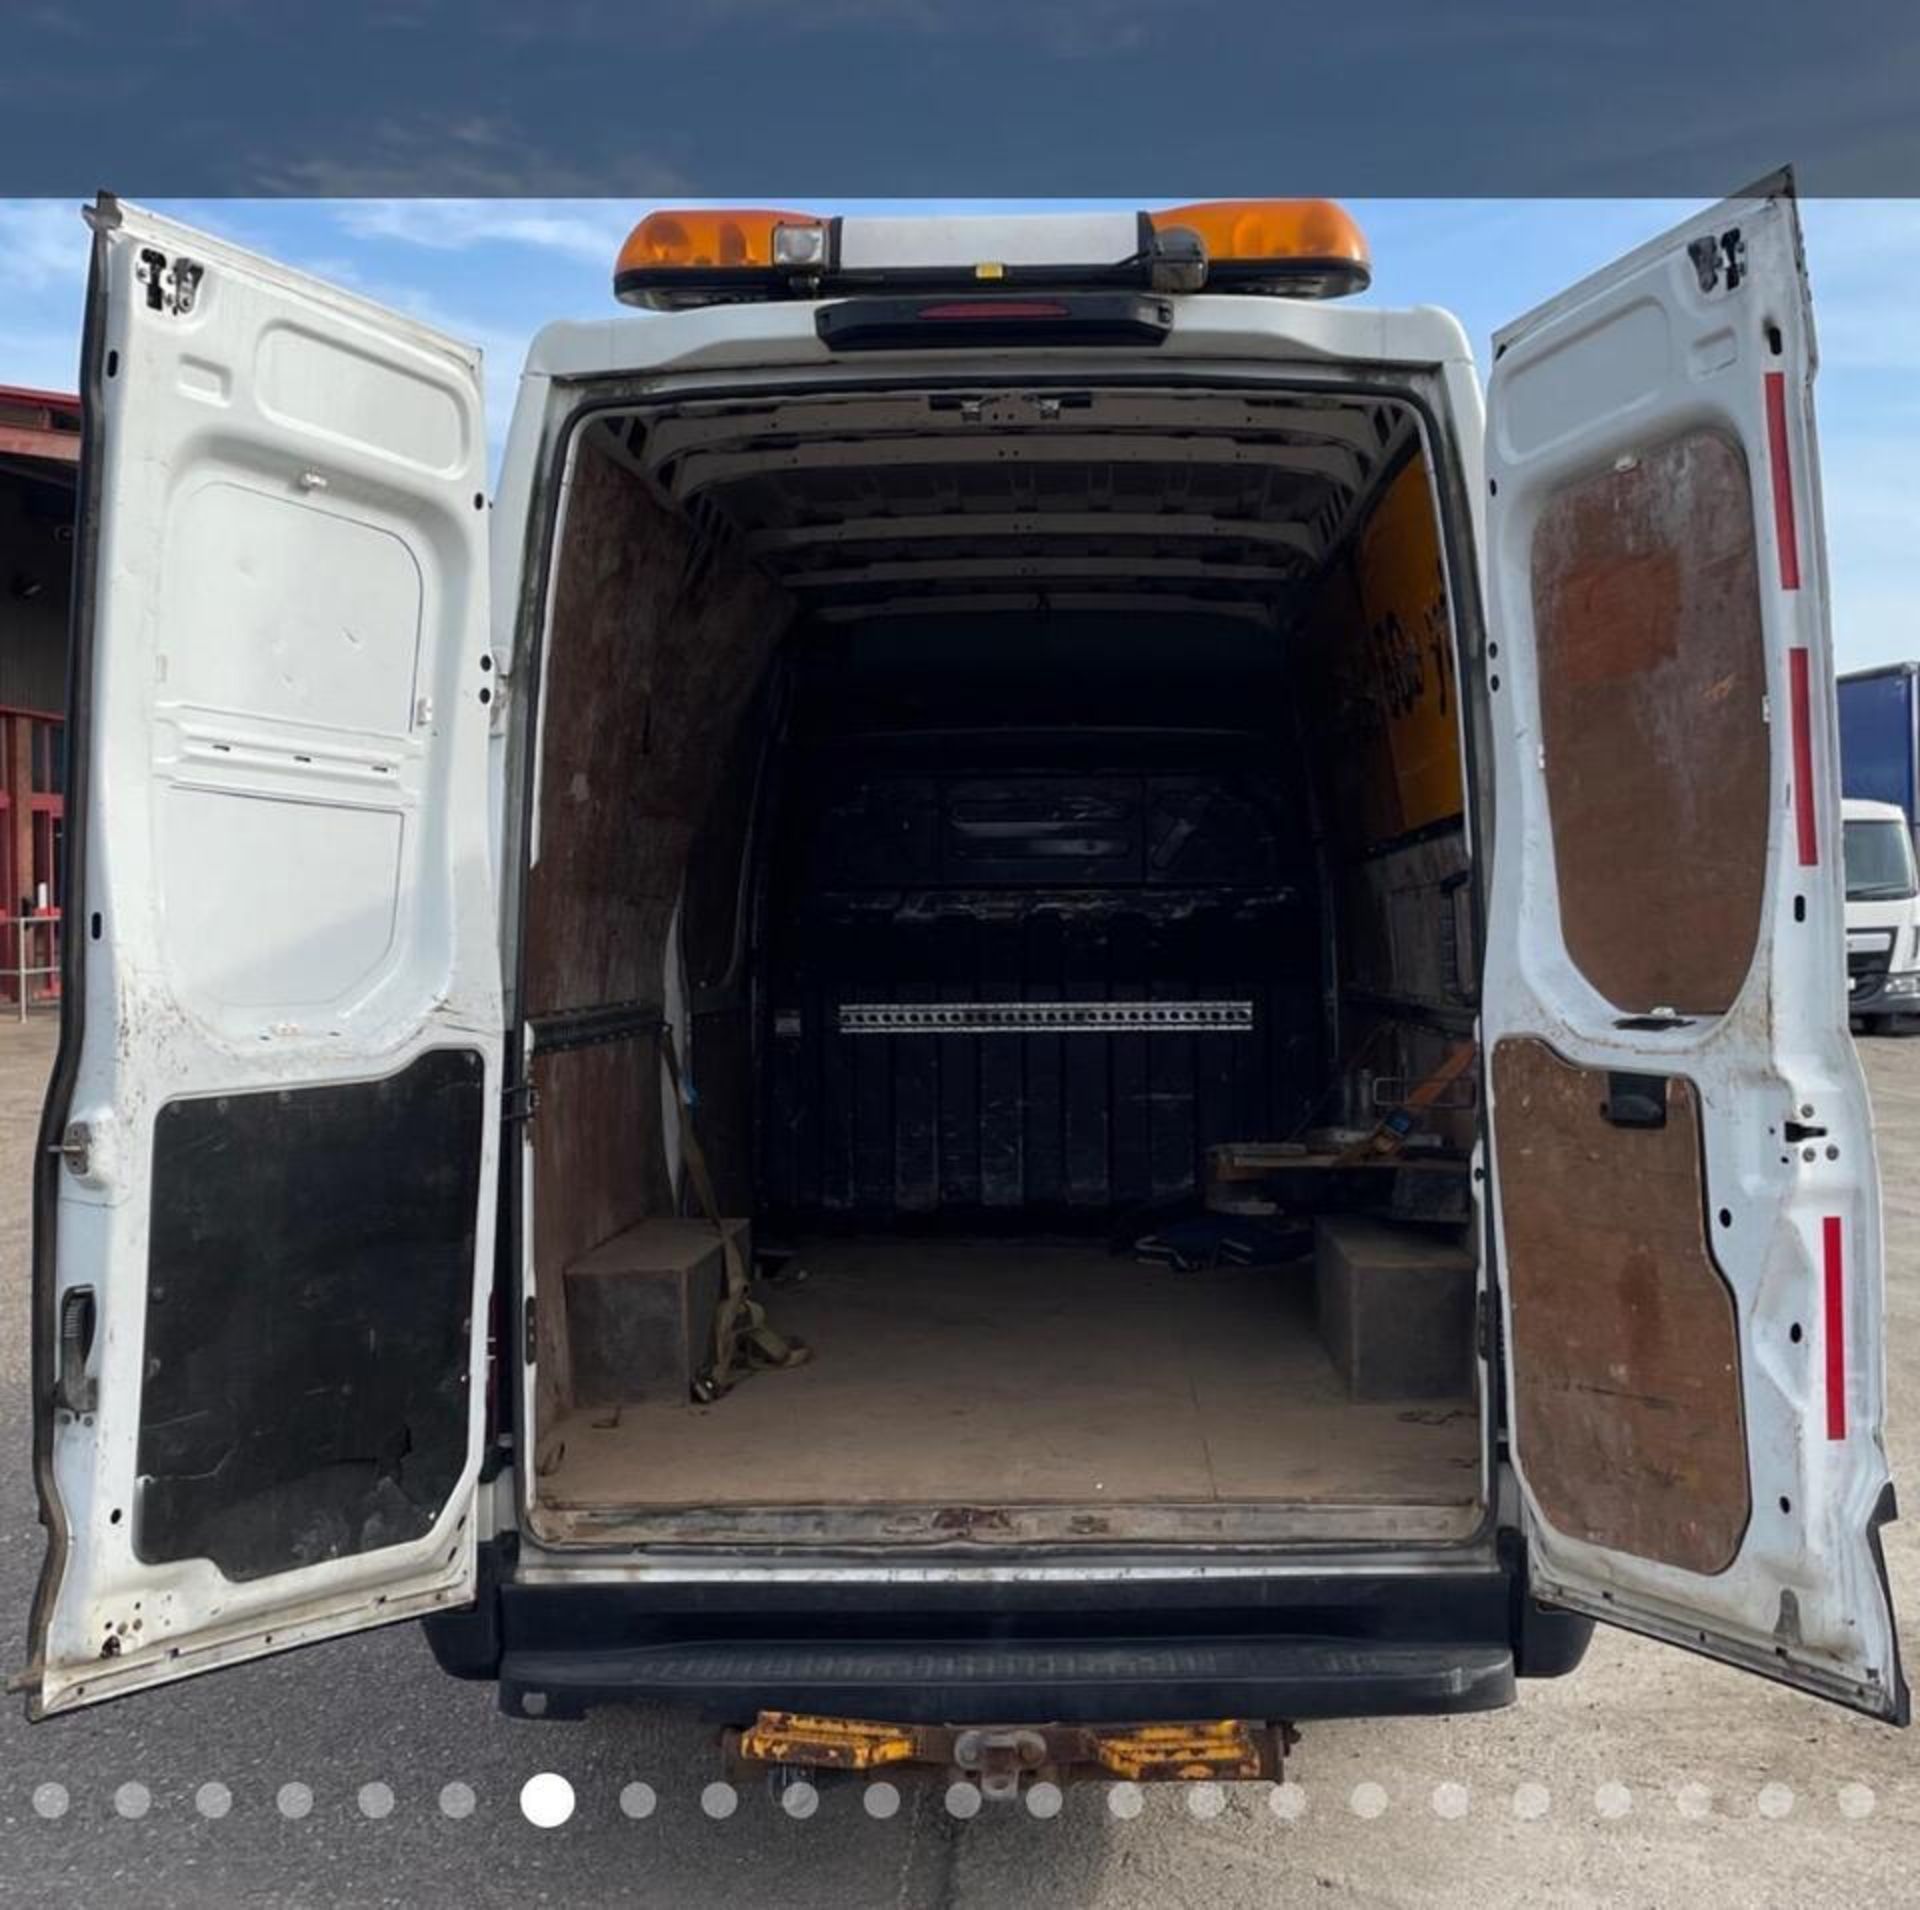 2015 IVECO DAILY-115K MILES-HPI CLEAR -READY TO GO! - Image 4 of 12